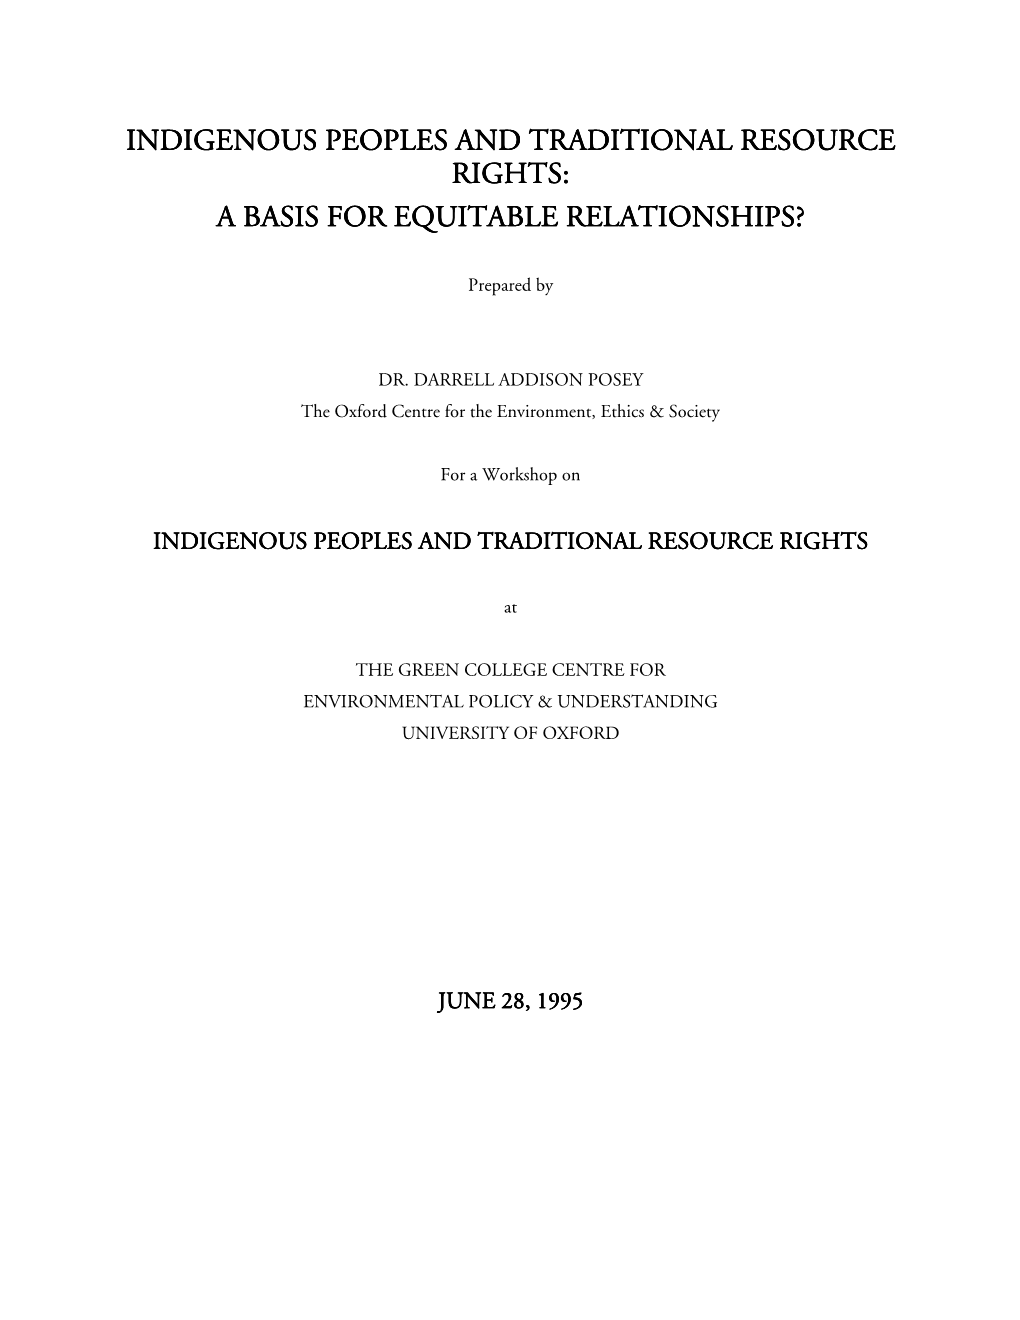 Indigenous Peoples and Traditional Resource Rights: a Basis for Equitable Relationships?